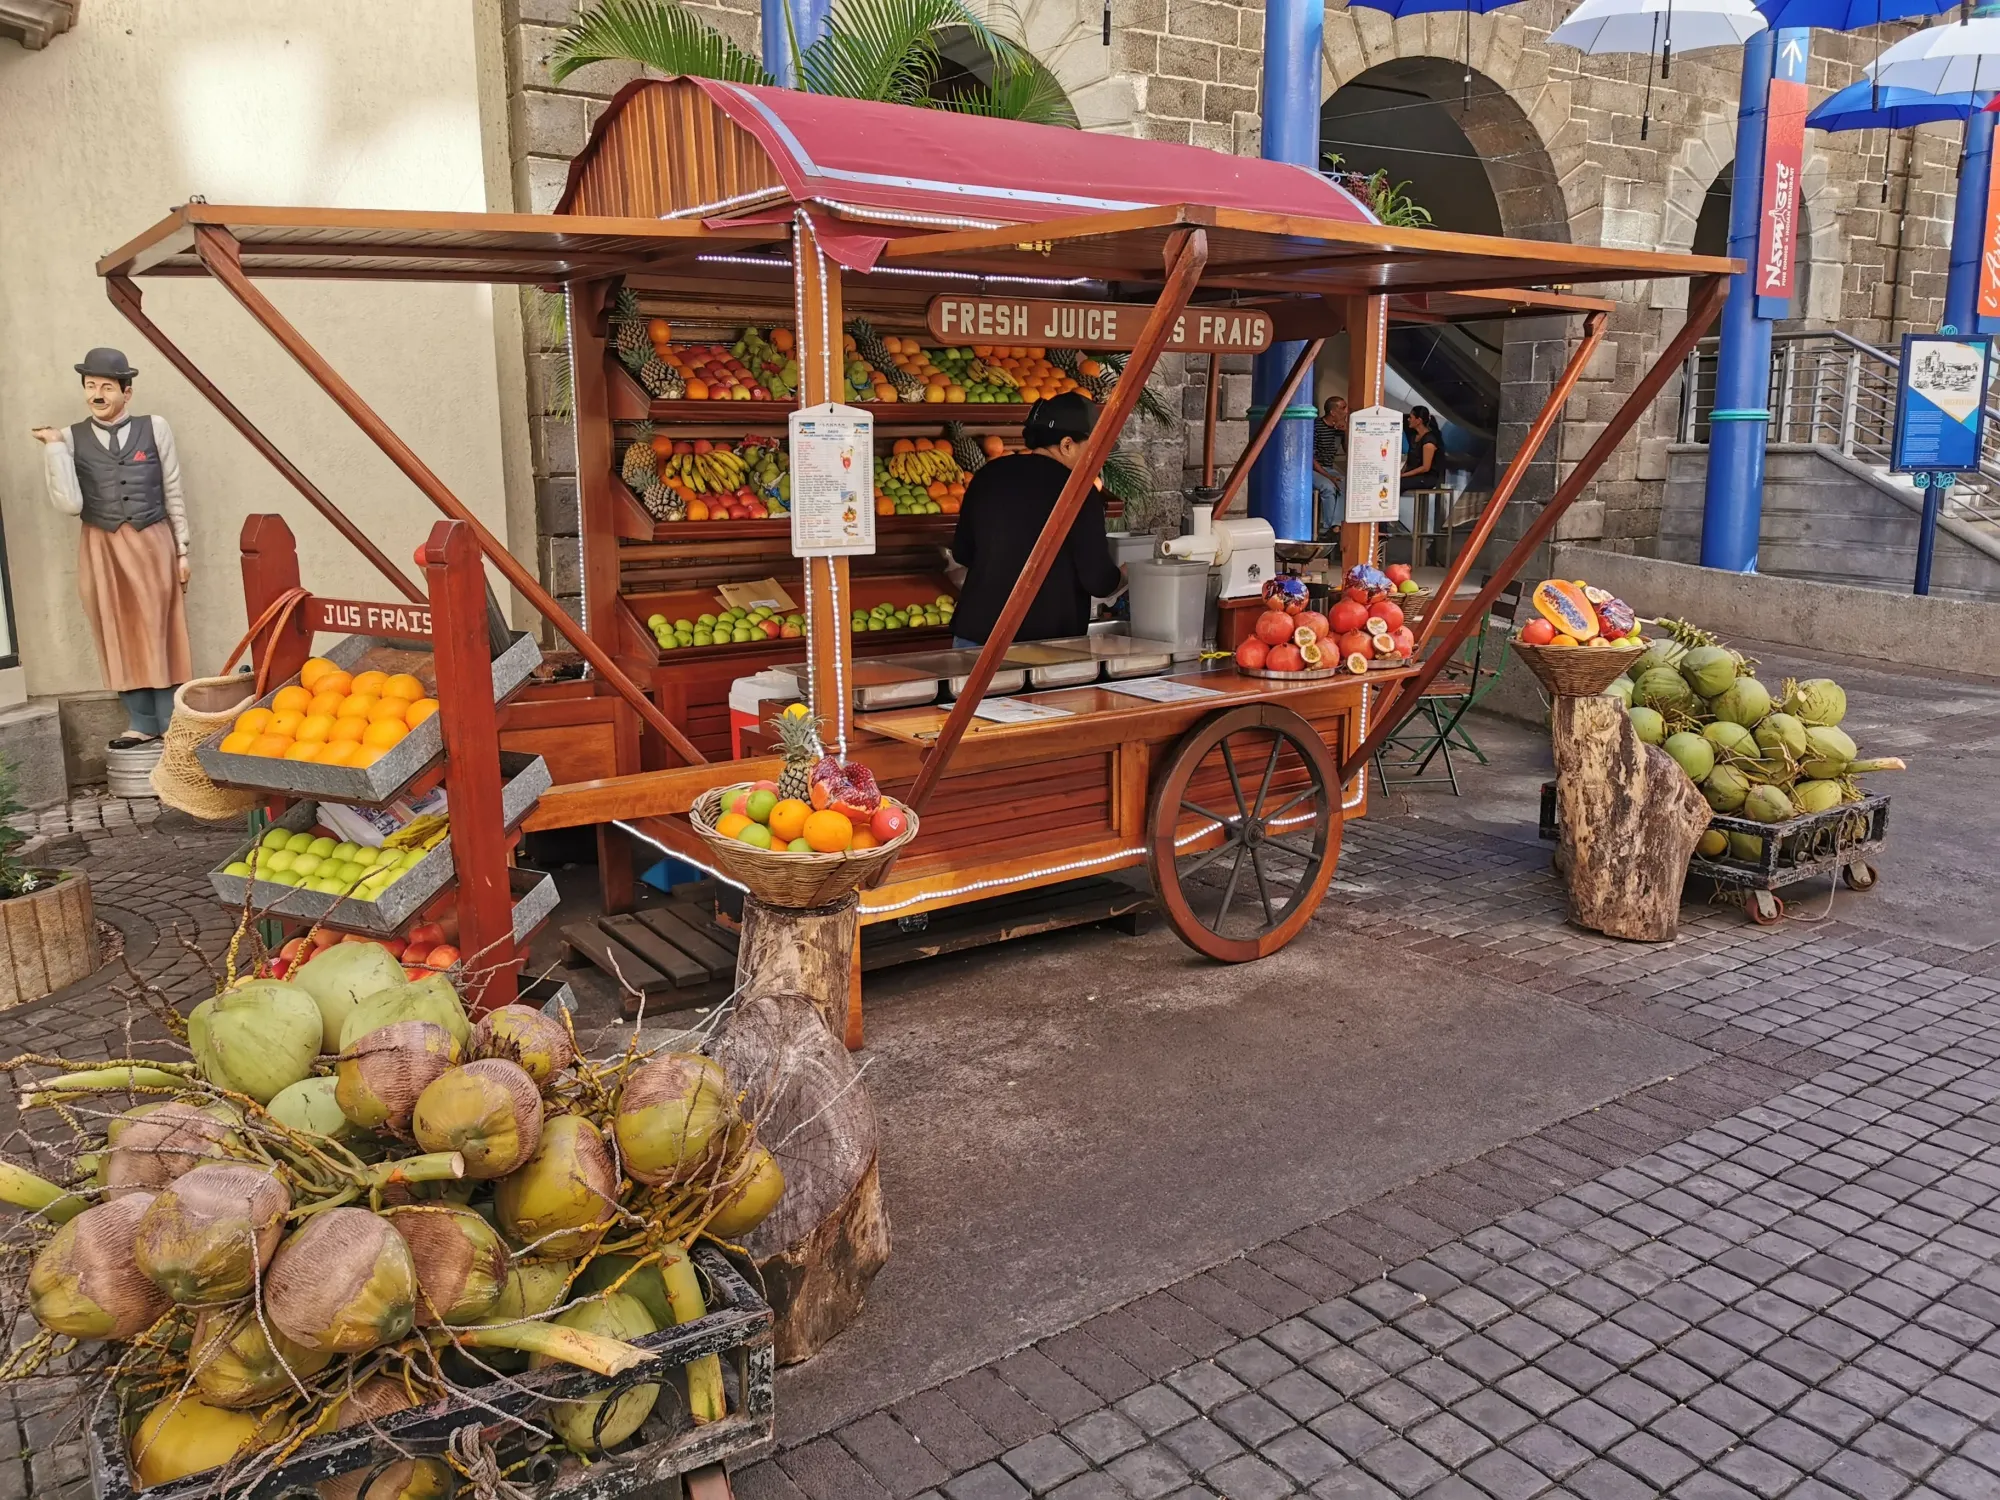 Image of a fruit stand in Mauritius